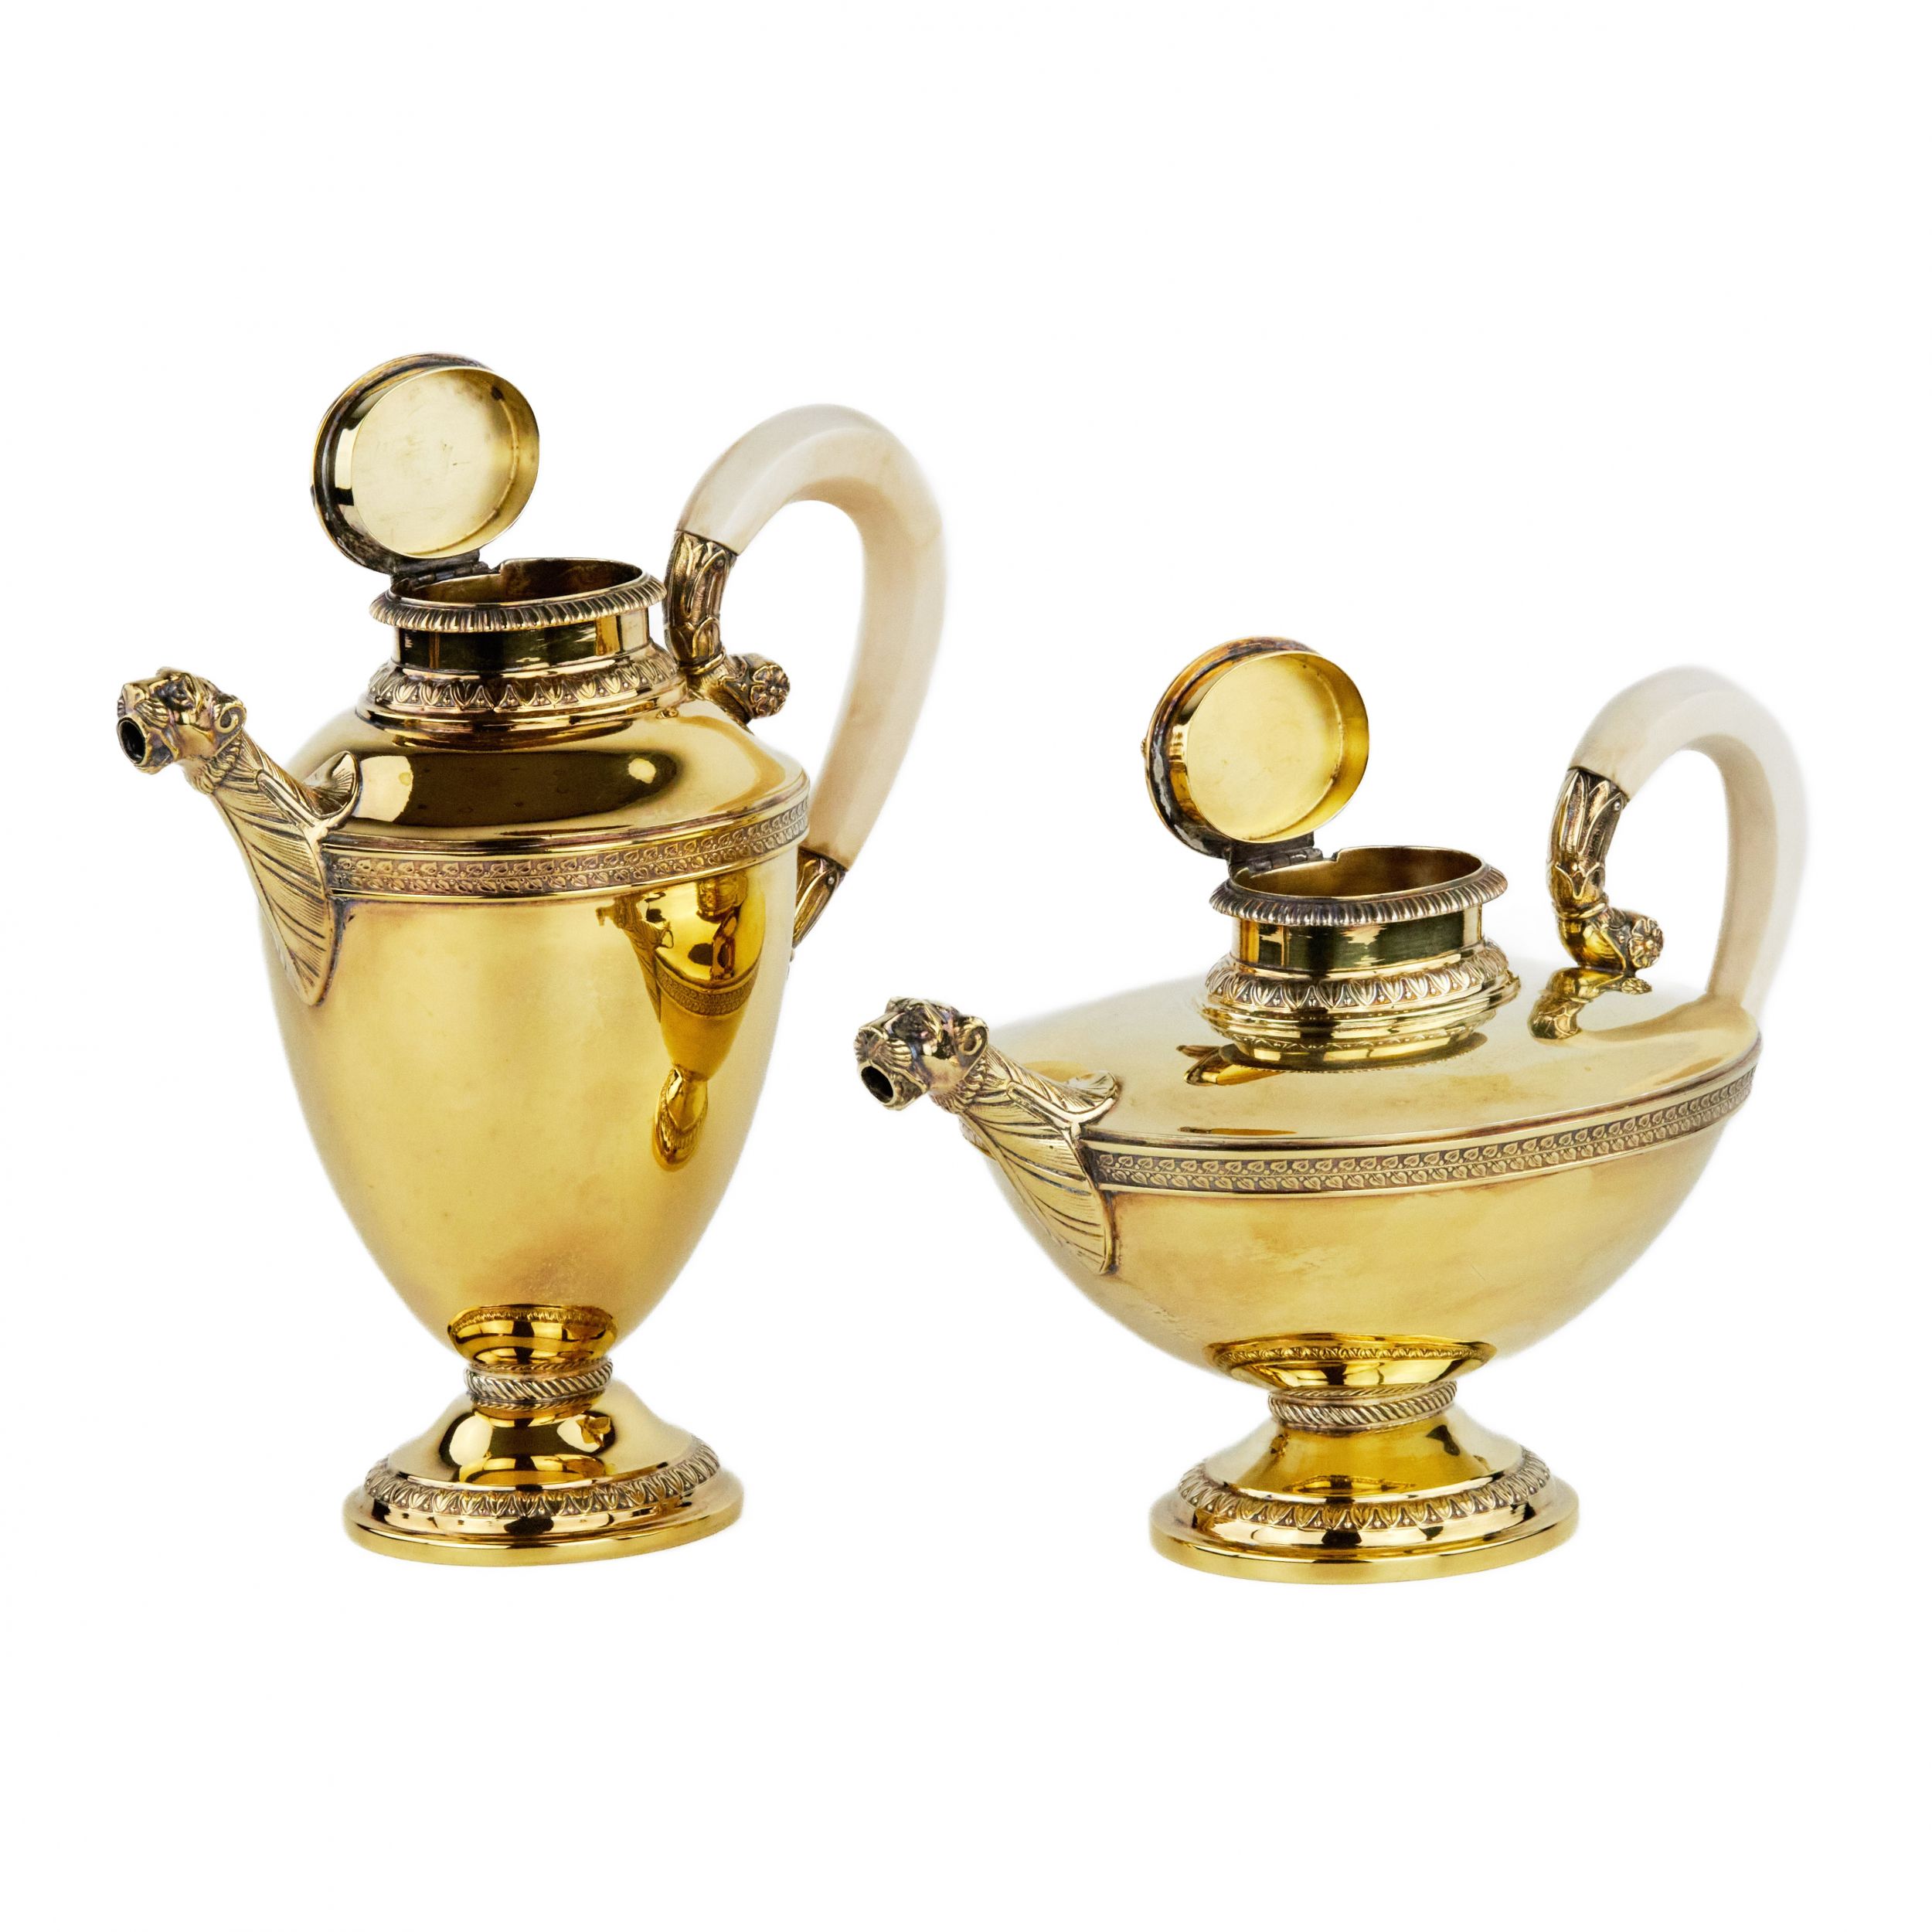 Tea and coffee service made of gilded silver. Bruckmann & Sohne. - Image 4 of 10